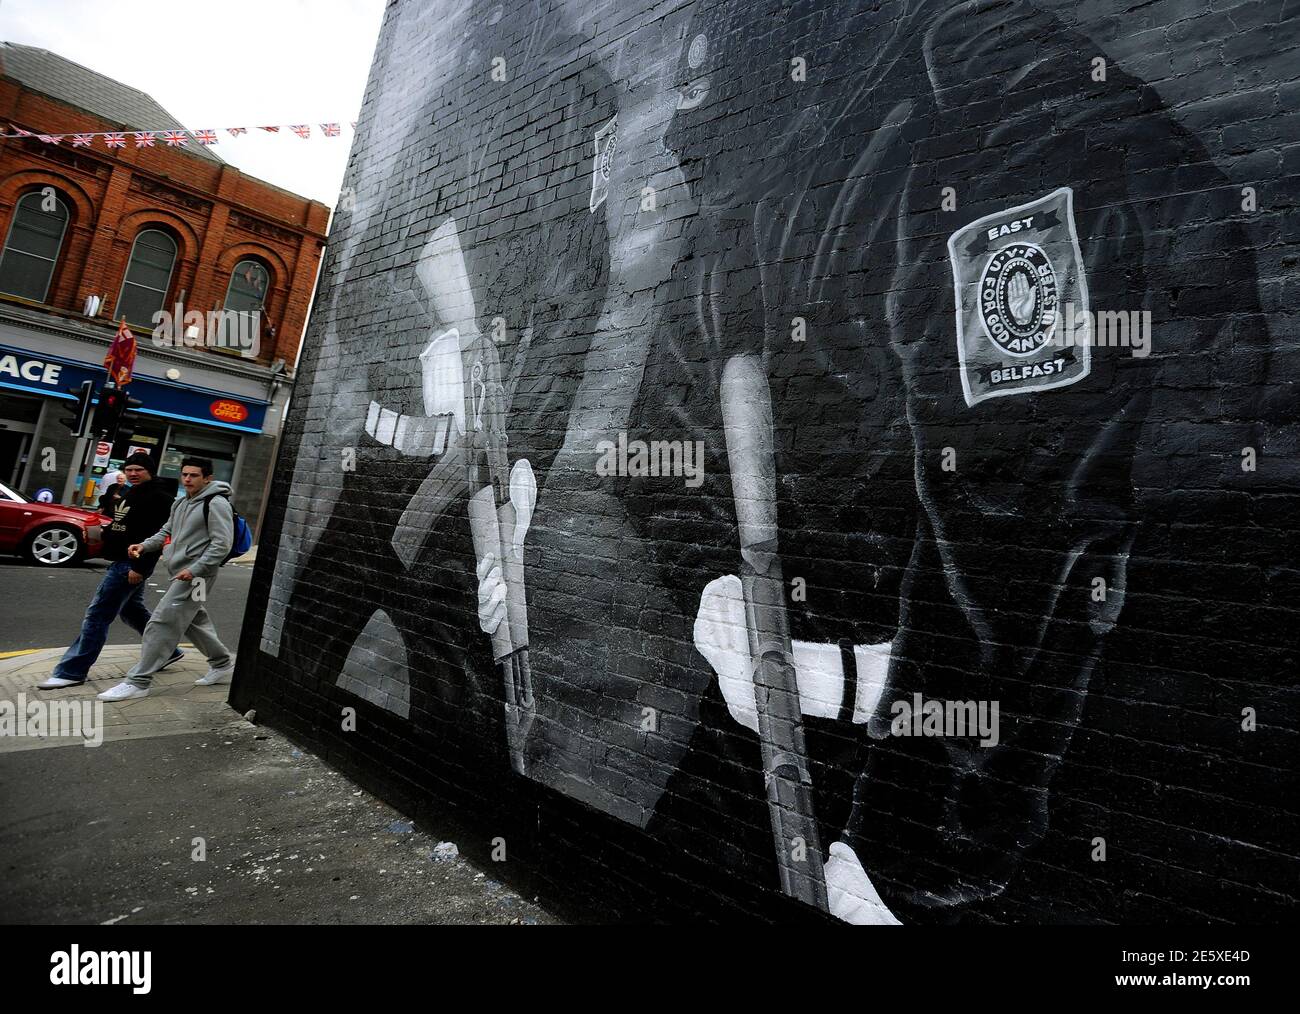 Locals pass a mural showing loyalist Ulster Volunteer Force (UVF) gunmen on a wall in a predominantly protestant area of east Belfast June 23, 2011. The violence in the Catholic Short Strand enclave of mainly Protestant east Belfast has come at the start of the 'marching season', a time of annual parades by Protestants which has triggered violent protests by Catholics in the past.  REUTERS/Dylan Martinez   (NORTHERN IRELAND - Tags: CIVIL UNREST POLITICS IMAGES OF THE DAY) Stock Photo